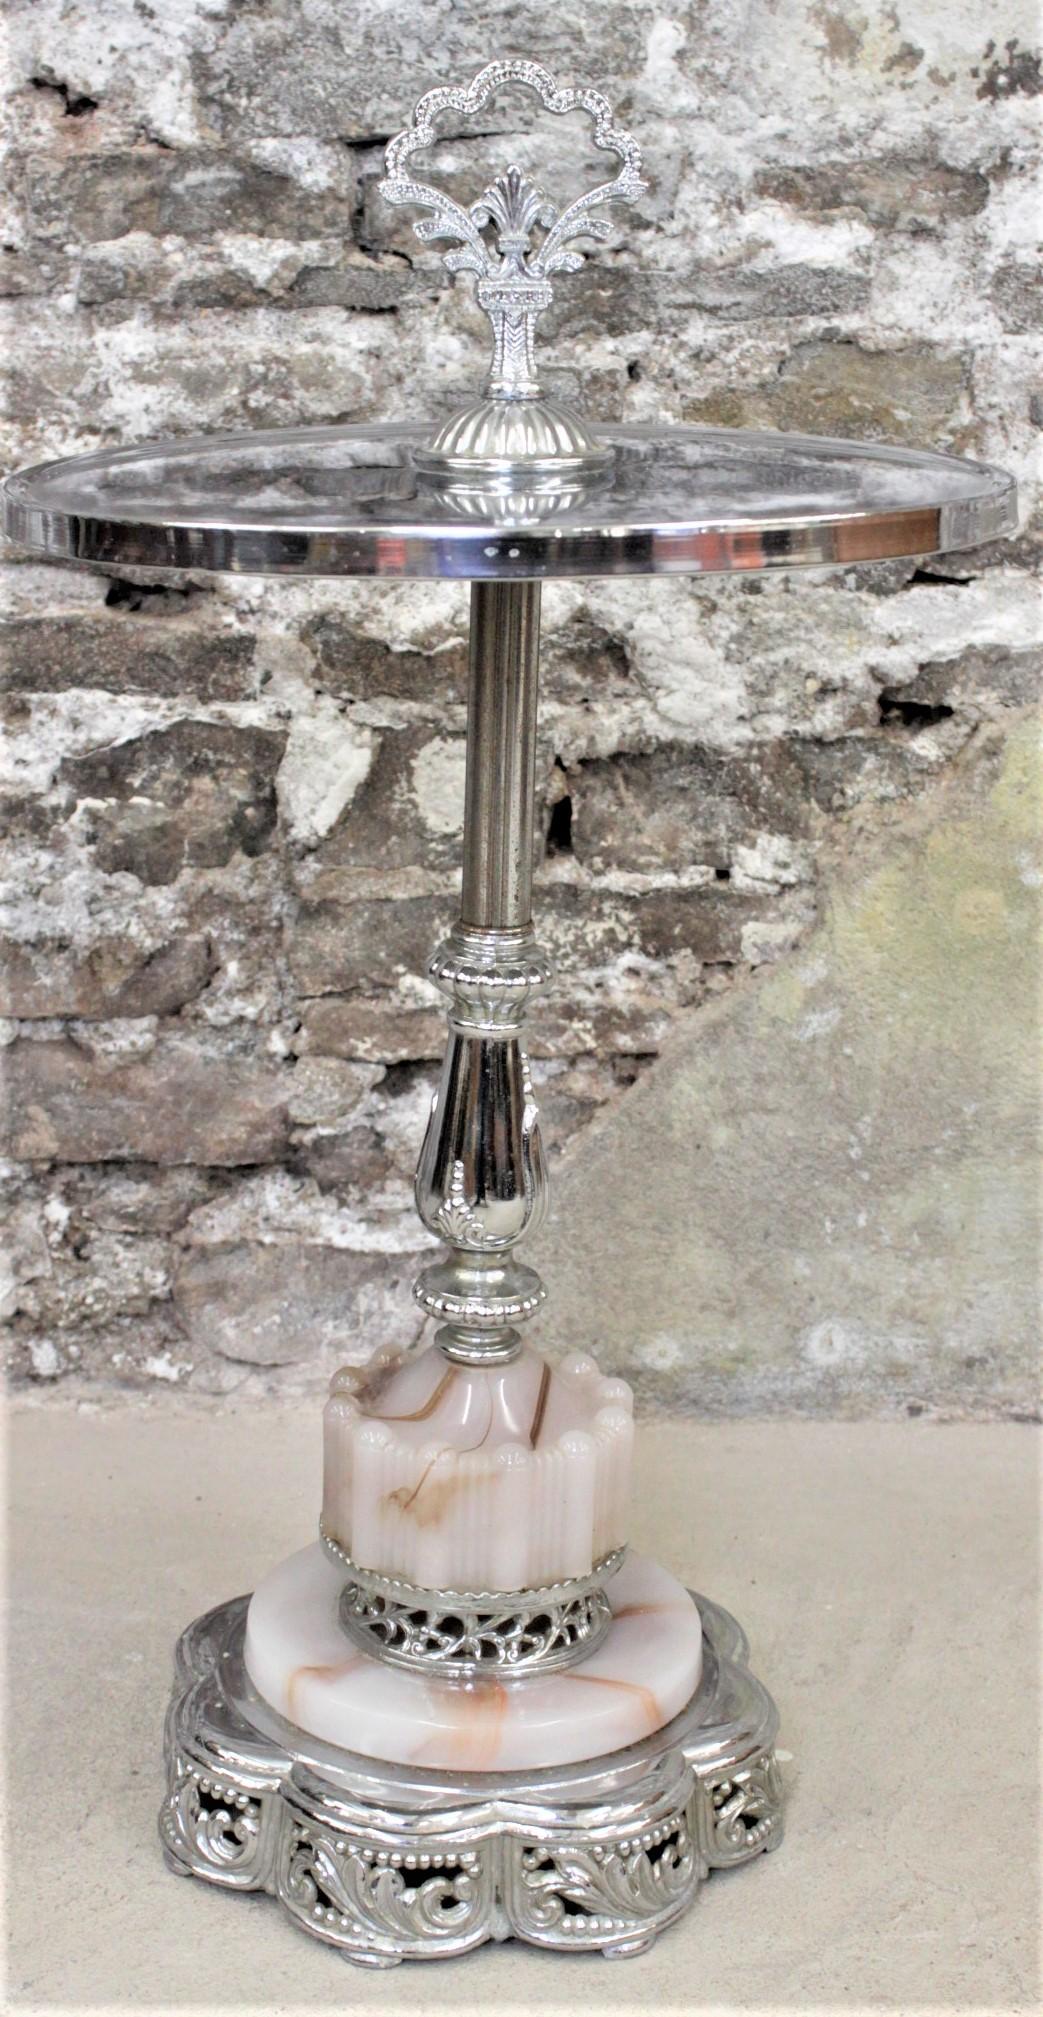 American Art Deco Styled Chrome and Swirled Glass Smoker's Stand or Accent Table For Sale